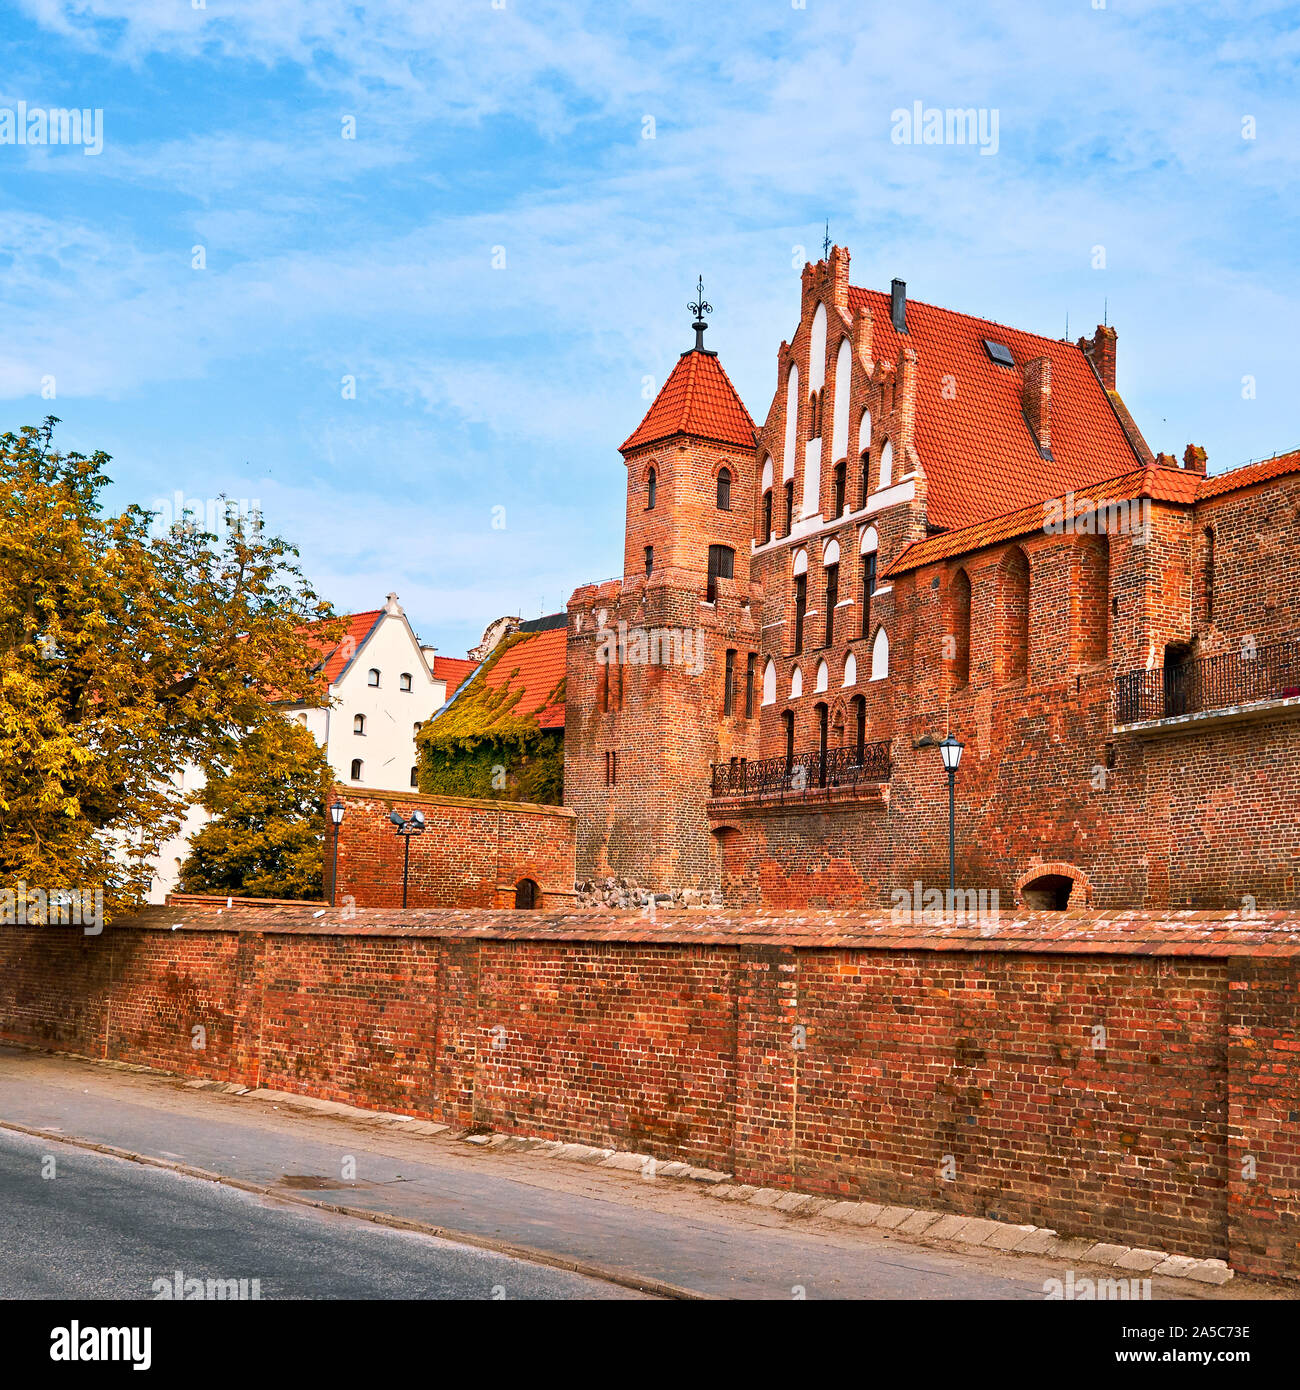 Ancient city wall and medieval brick buildings of Torun old town, UNESCO world heritage site, on a bright day in Autumn Stock Photo